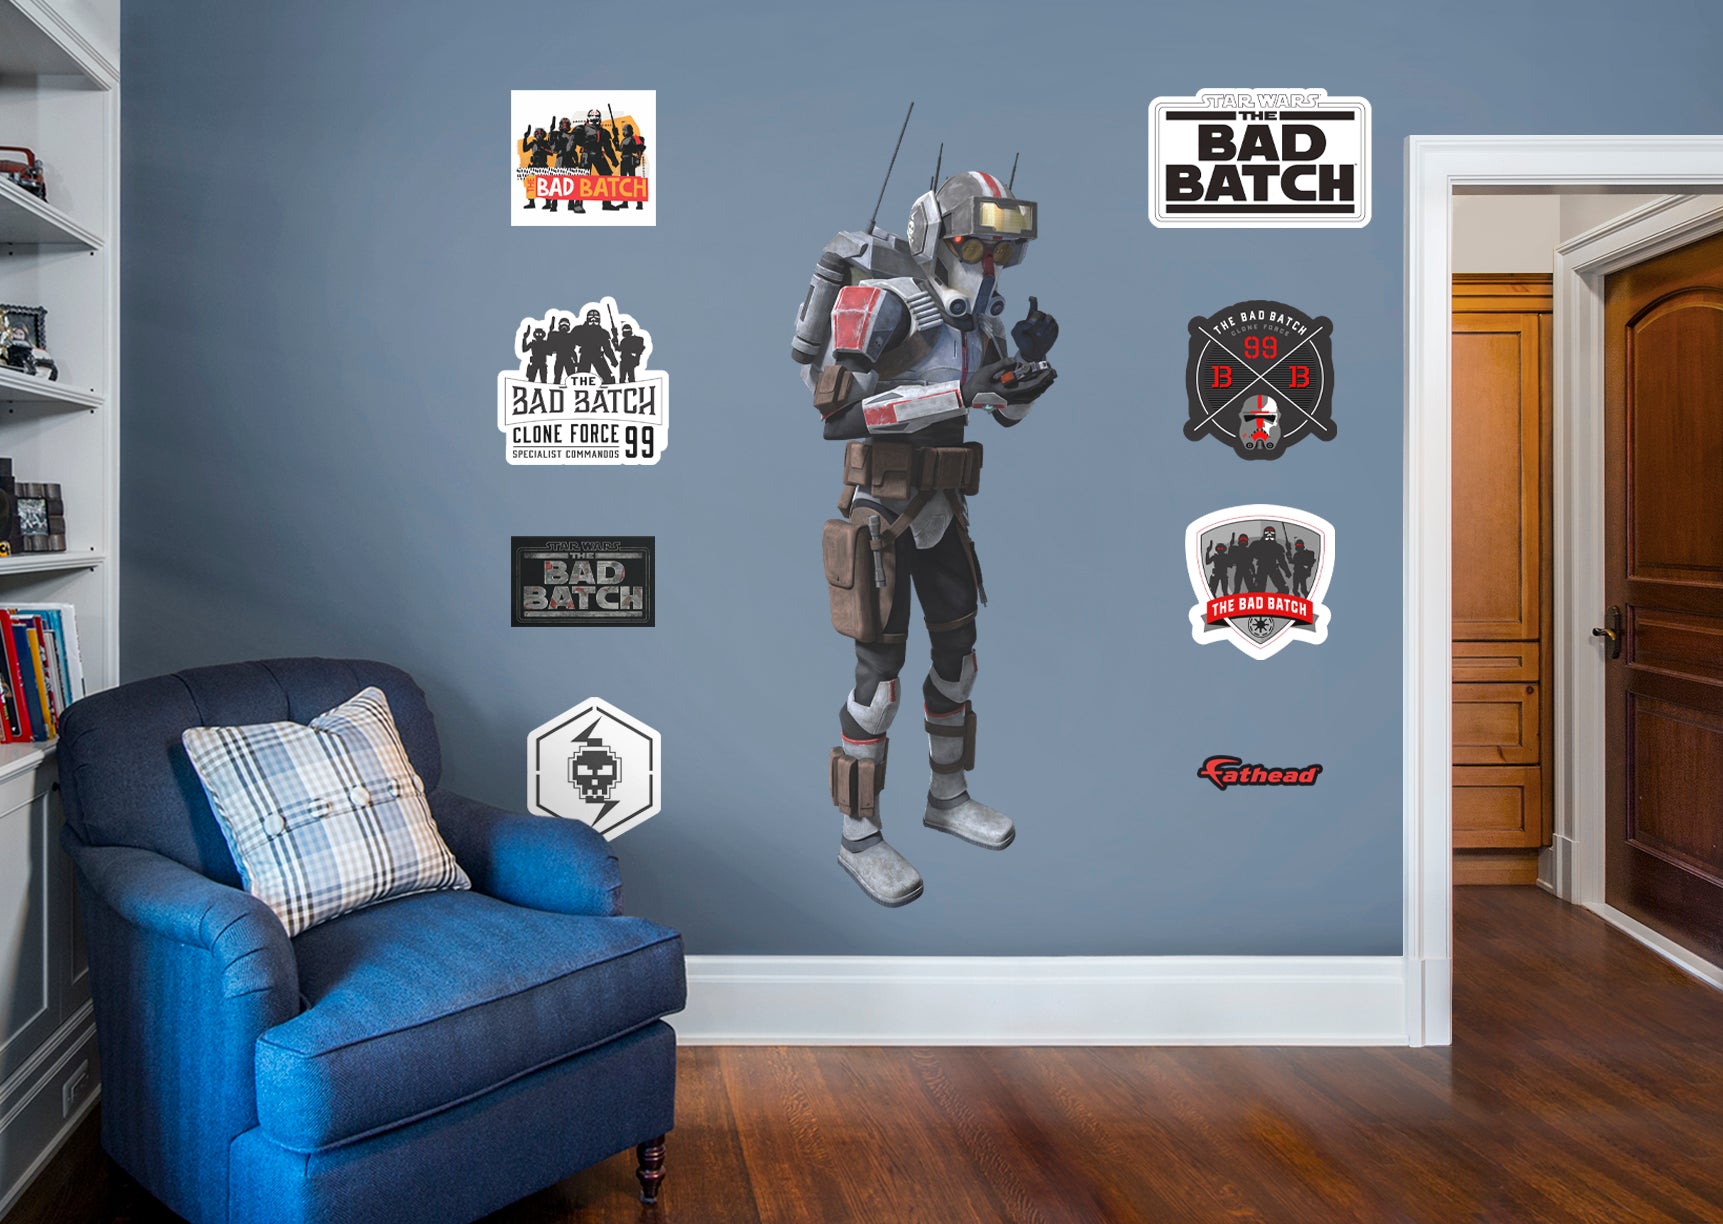 Bad Batch Tech - Officially Licensed Star Wars Removable Wall Decal Giant Character + 2 Decals by Fathead | Vinyl